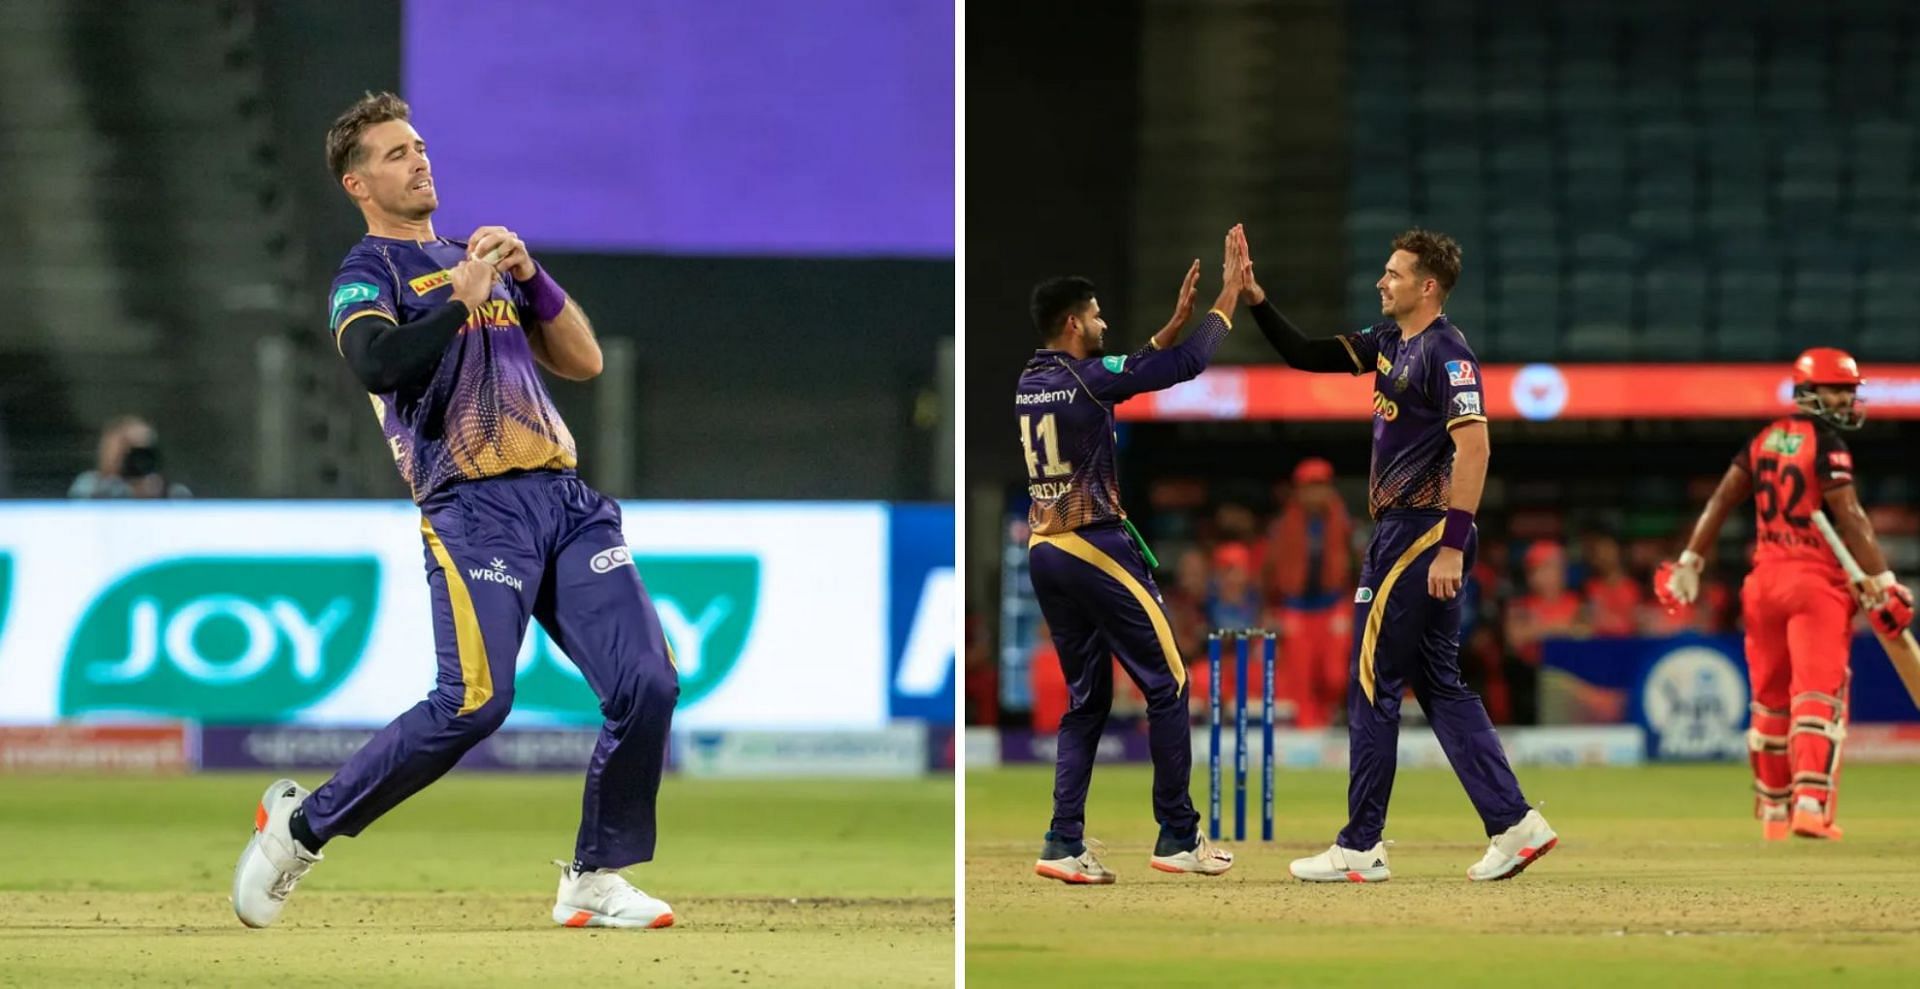 Tim Southee takes a brilliant catch on the follow through (Credit: BCCI/IPL)